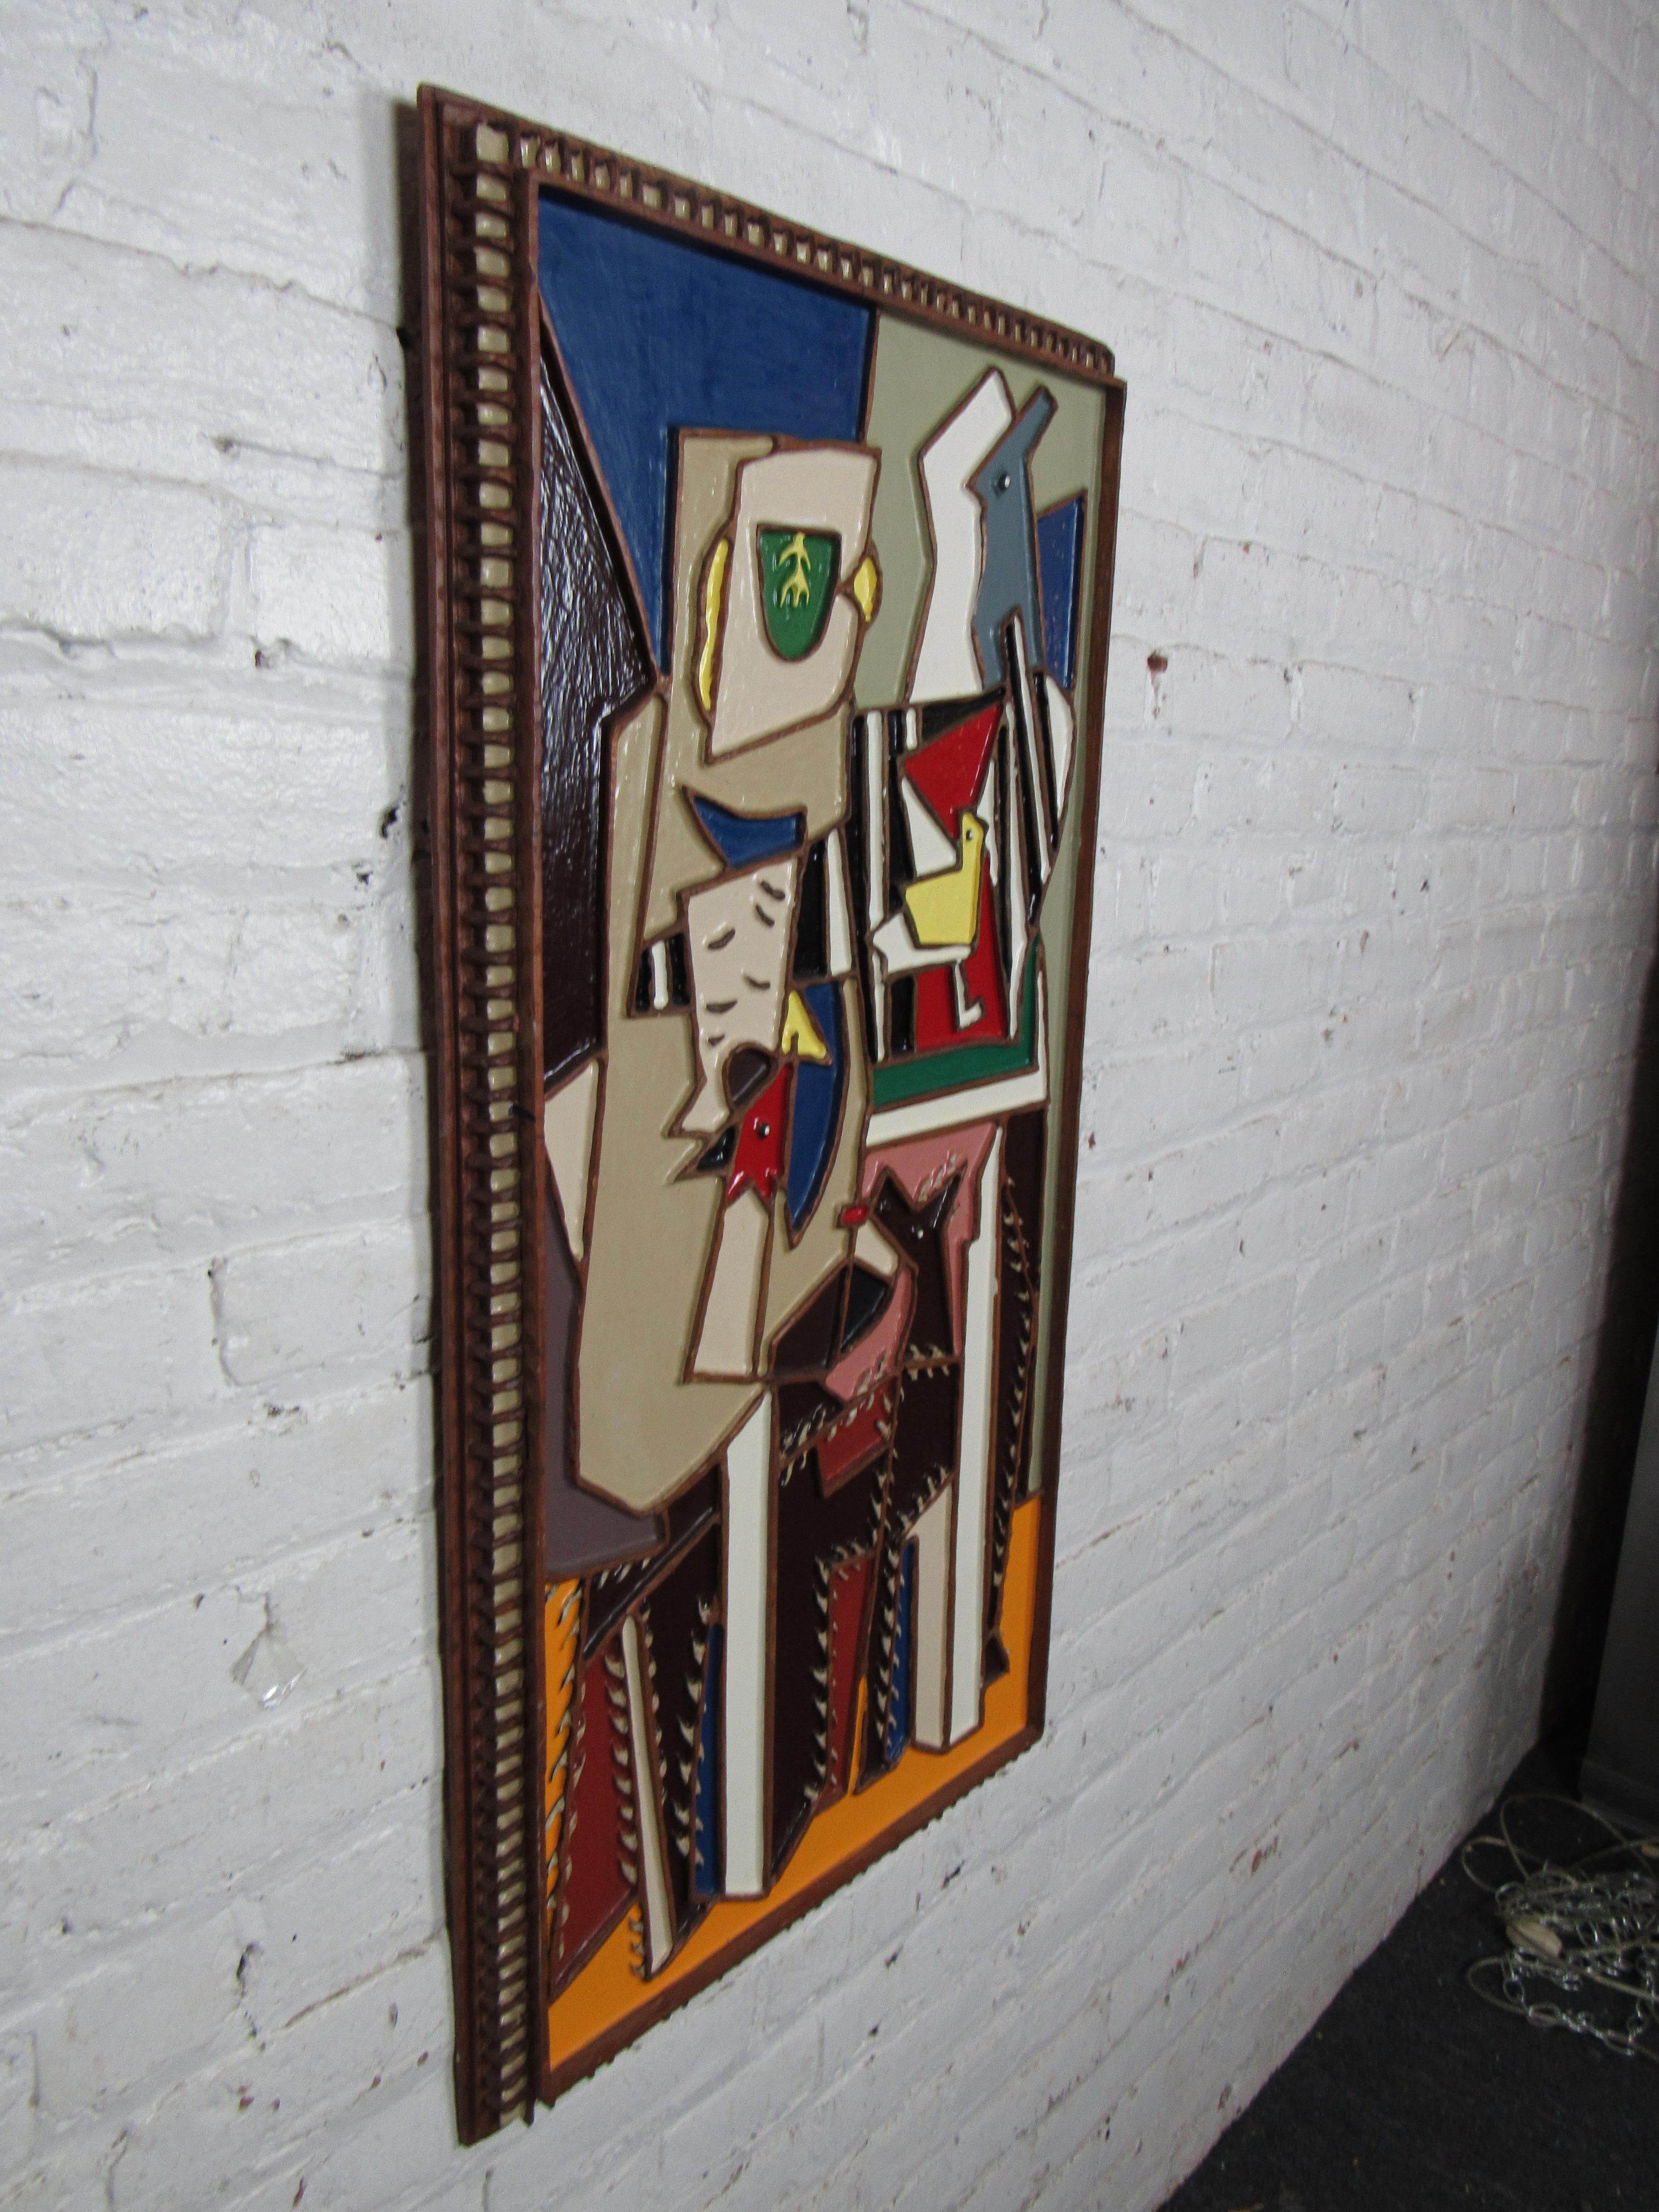 A colorful abstract painting by Sid Birnbaum, using lacquered wood construction and rendered in a Cubism-inspired style. Signed and dated 1986. Please confirm item location with seller (NY/NJ).